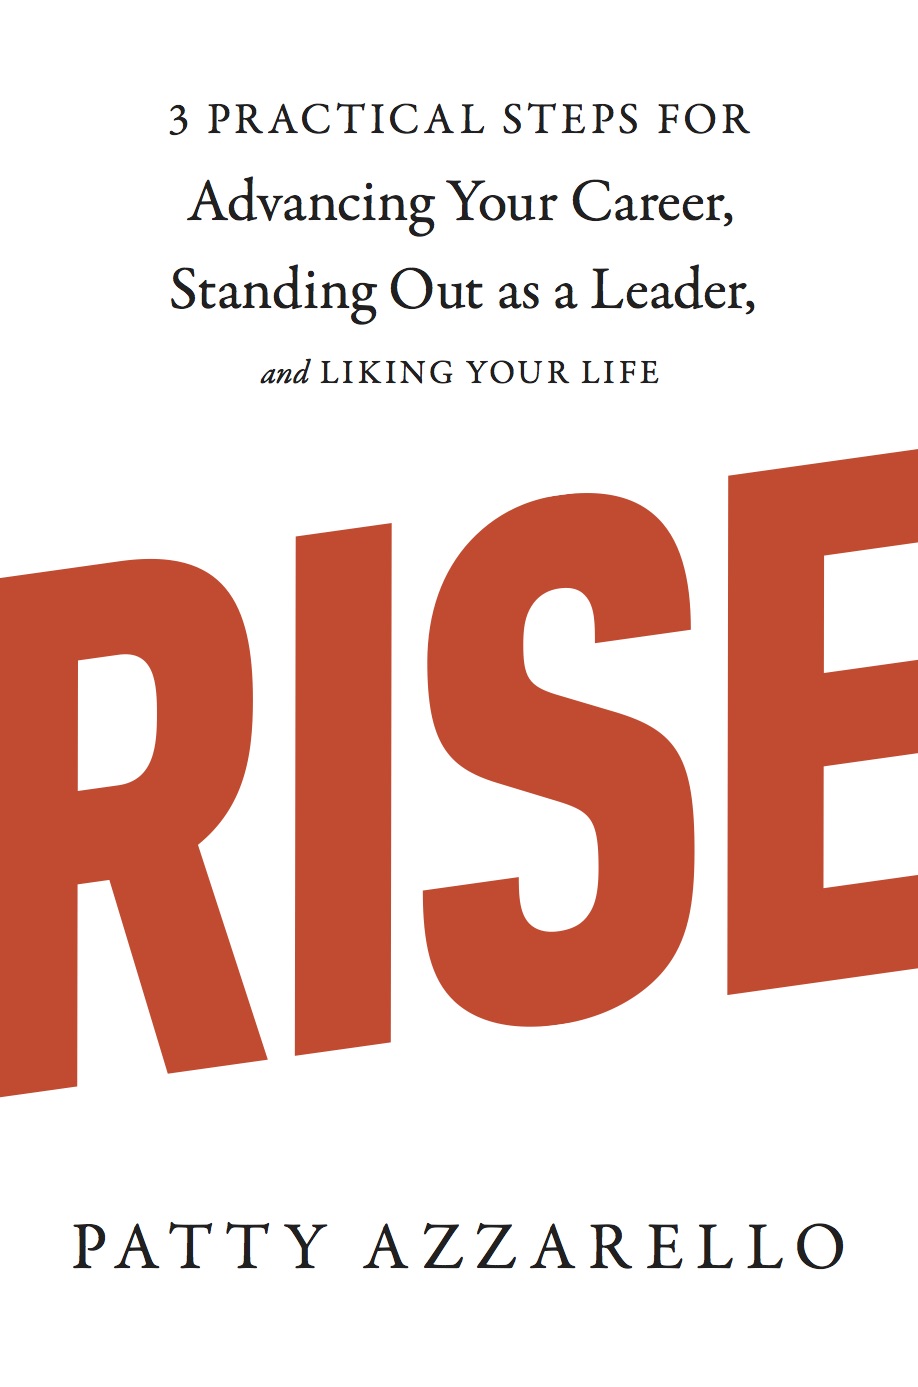  Rise: 3 Practical Steps for Advancing Your Career, Standing Out as a Leader, and Liking Your Life (Ten Speed)